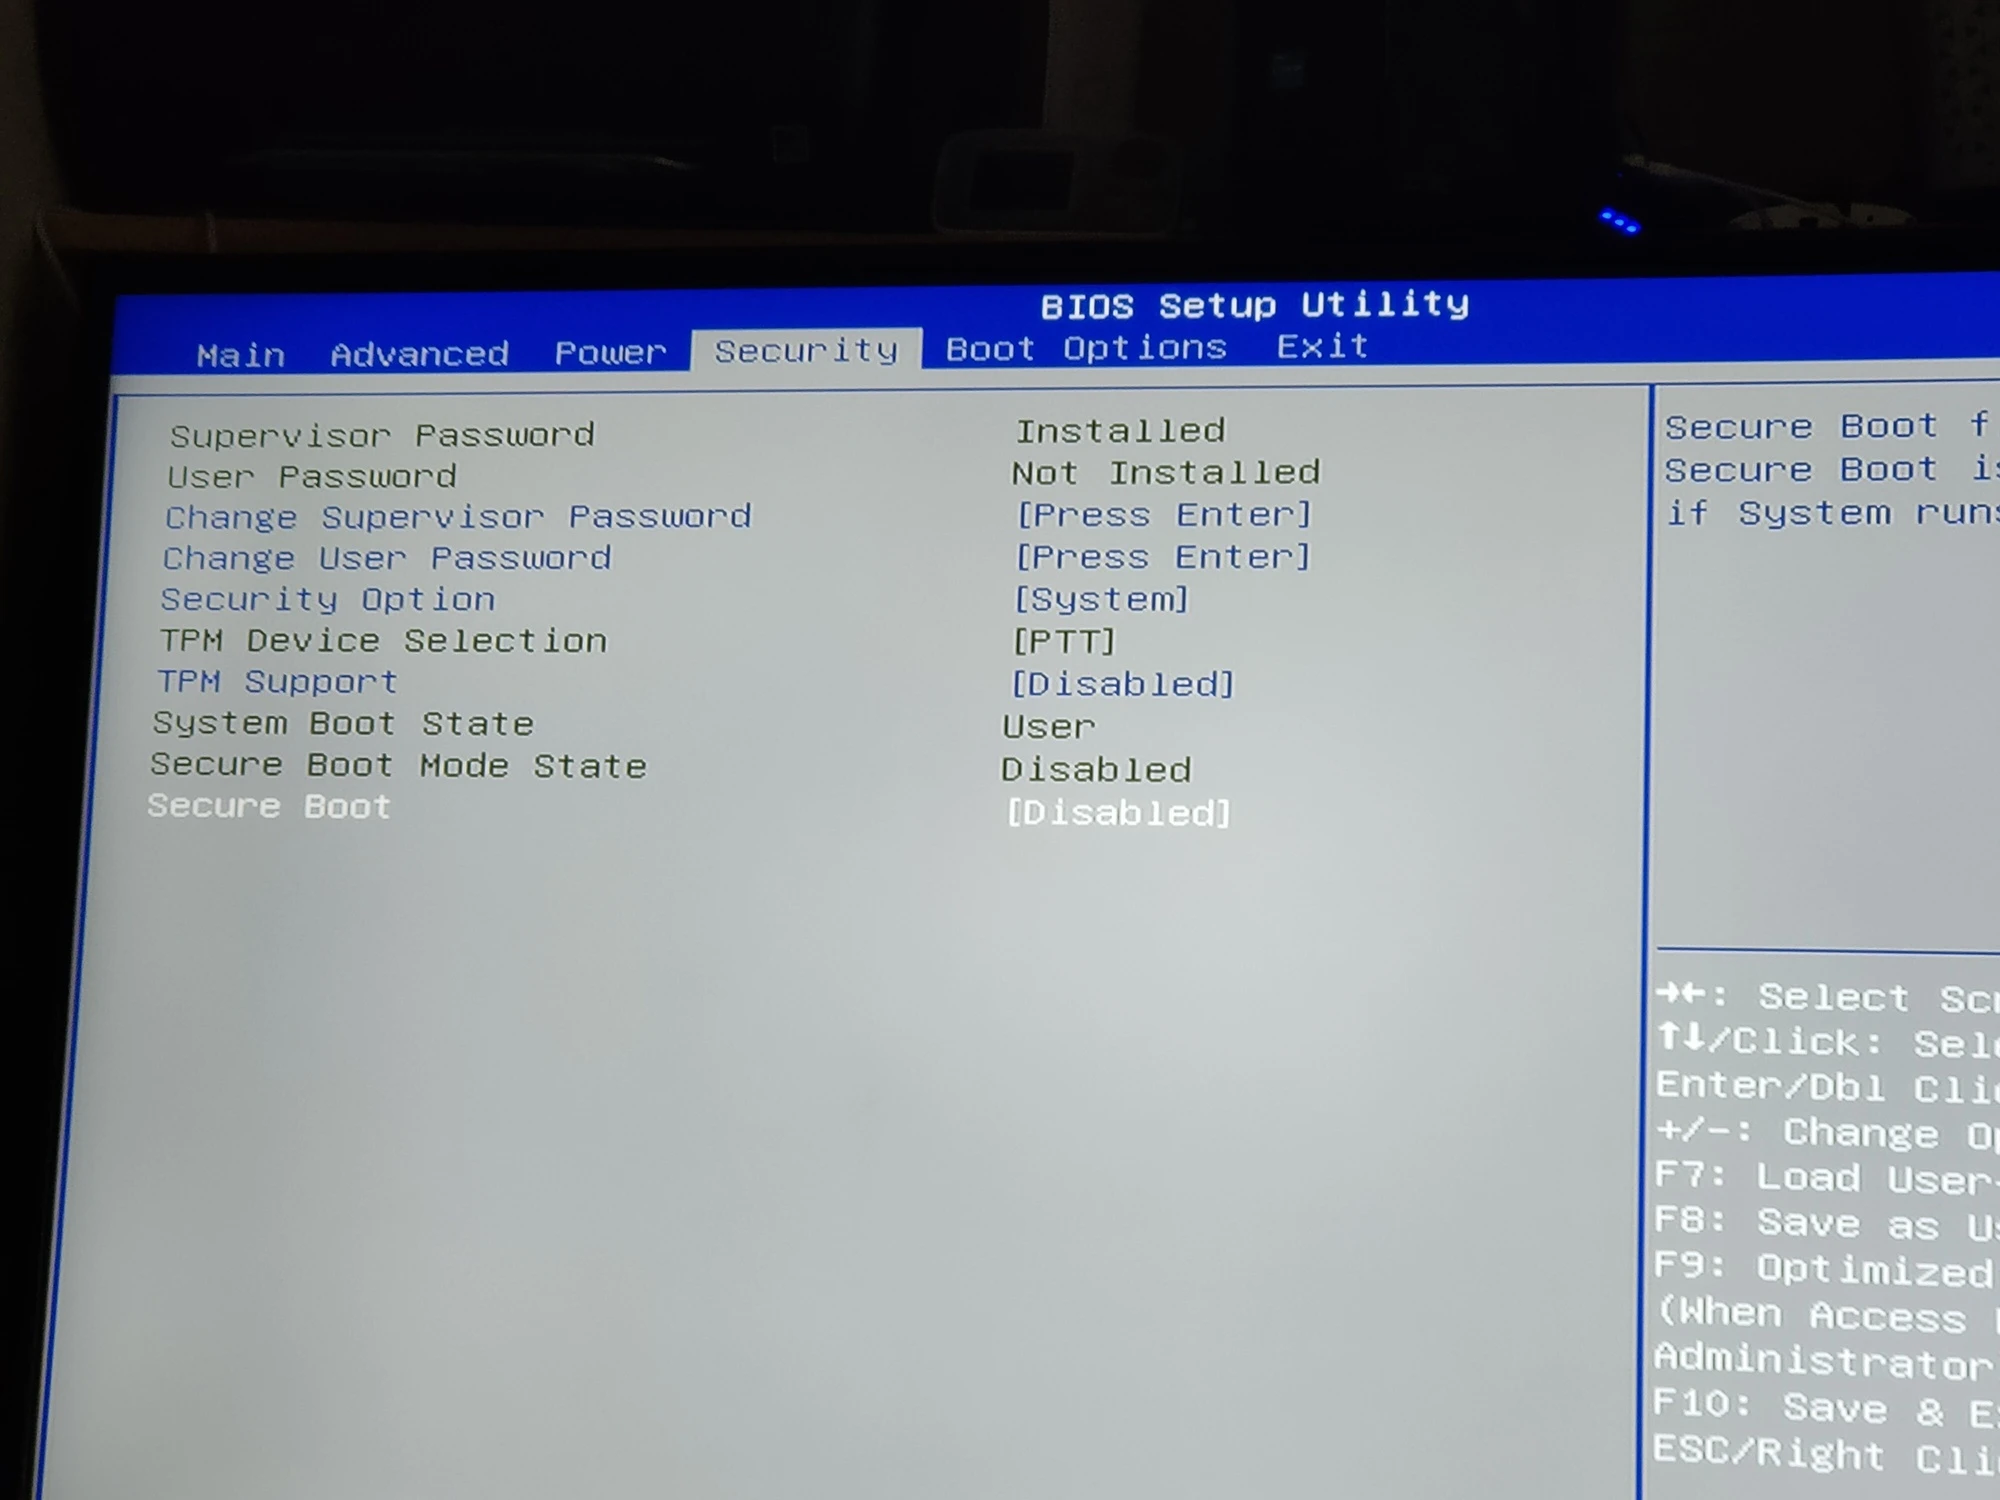 Disable Secure Boot and UEFI on a Acer Aspire laptop